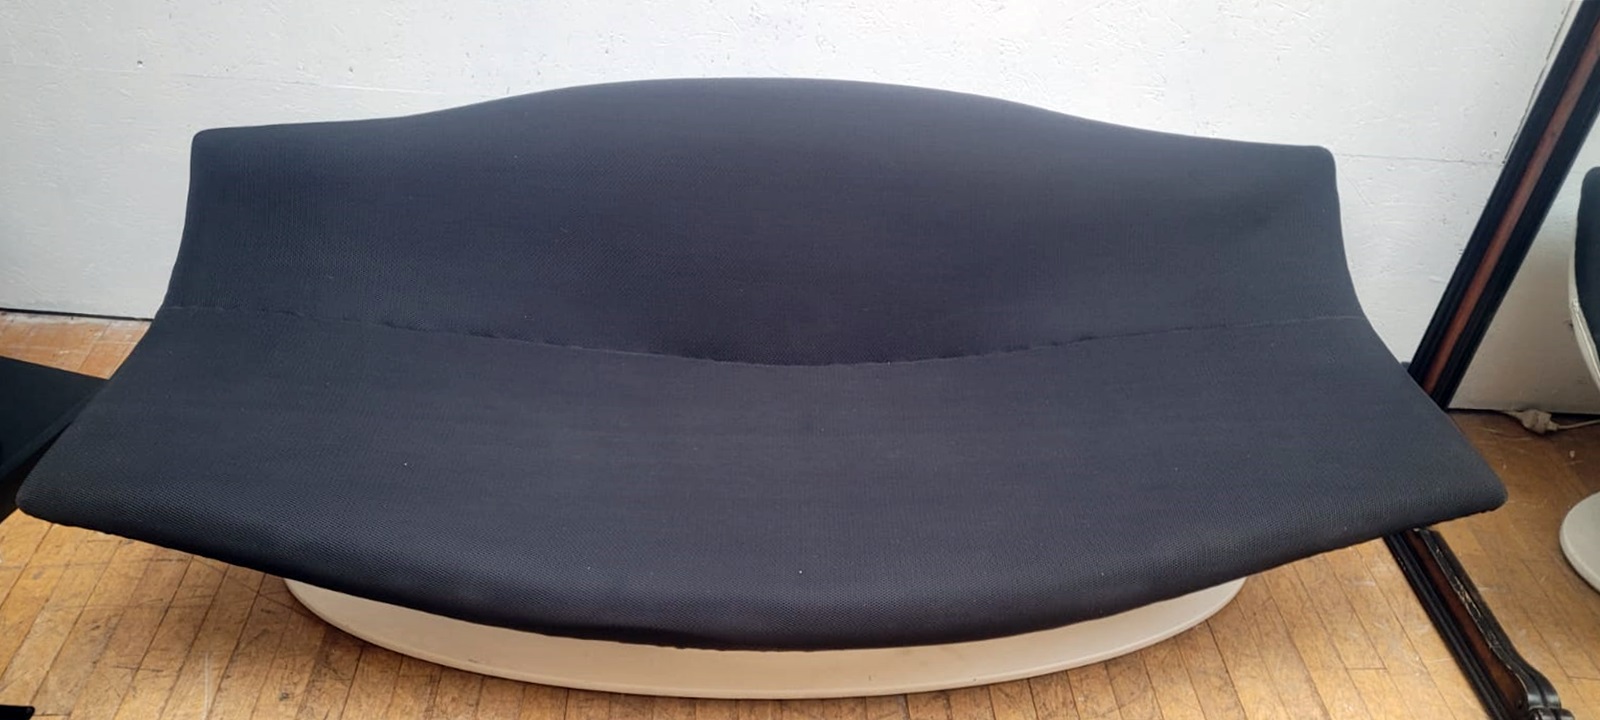 STEINER Paris, free-form sofa, circa 1980 (2 small hooks in the back)